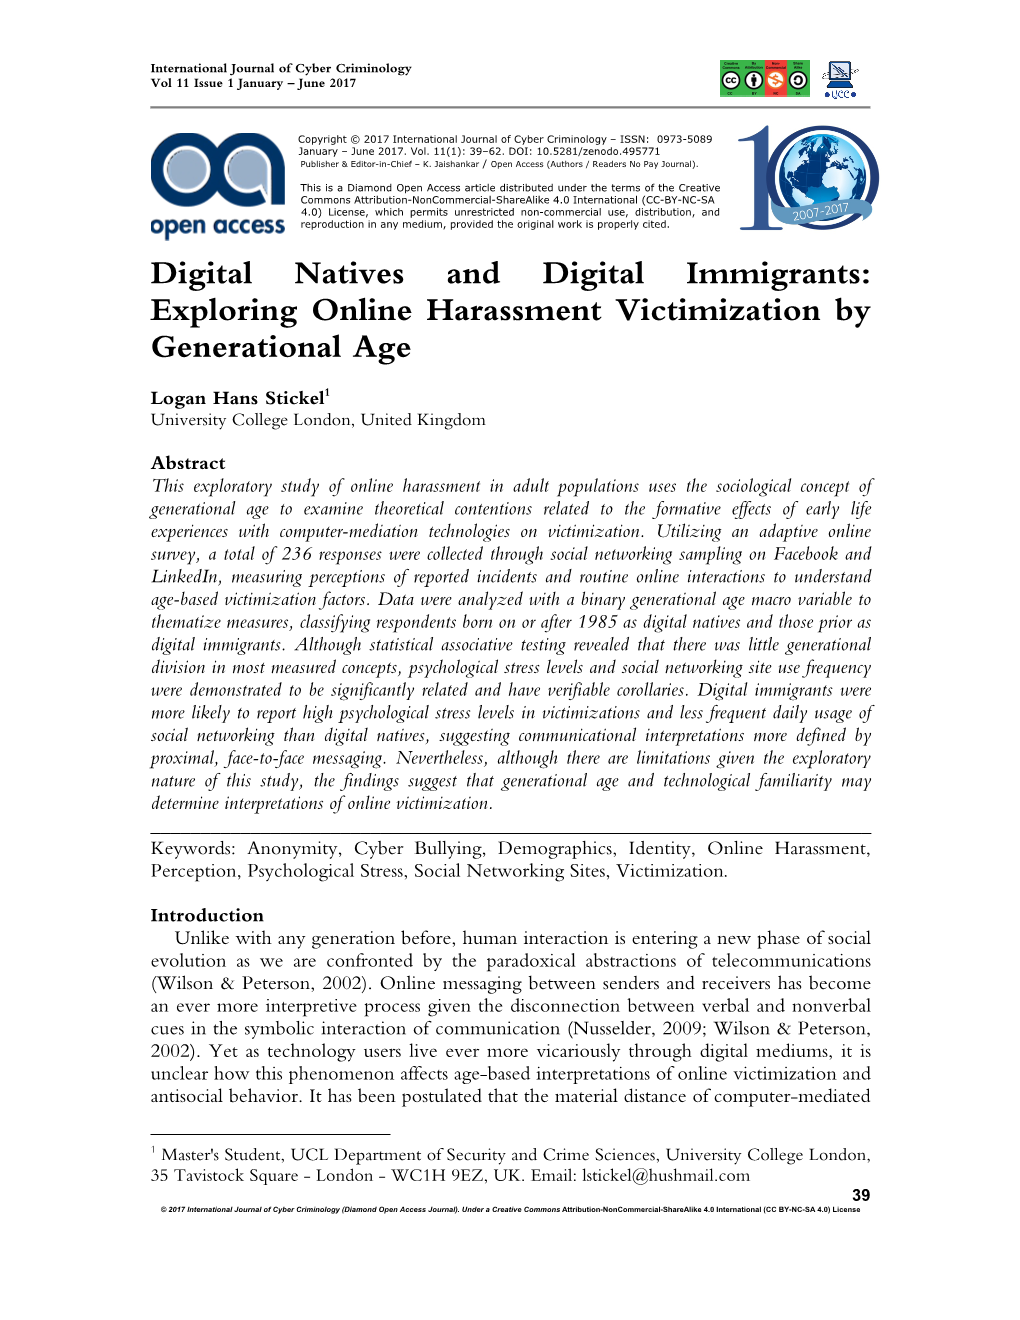 Digital Natives and Digital Immigrants: Exploring Online Harassment Victimization by Generational Age